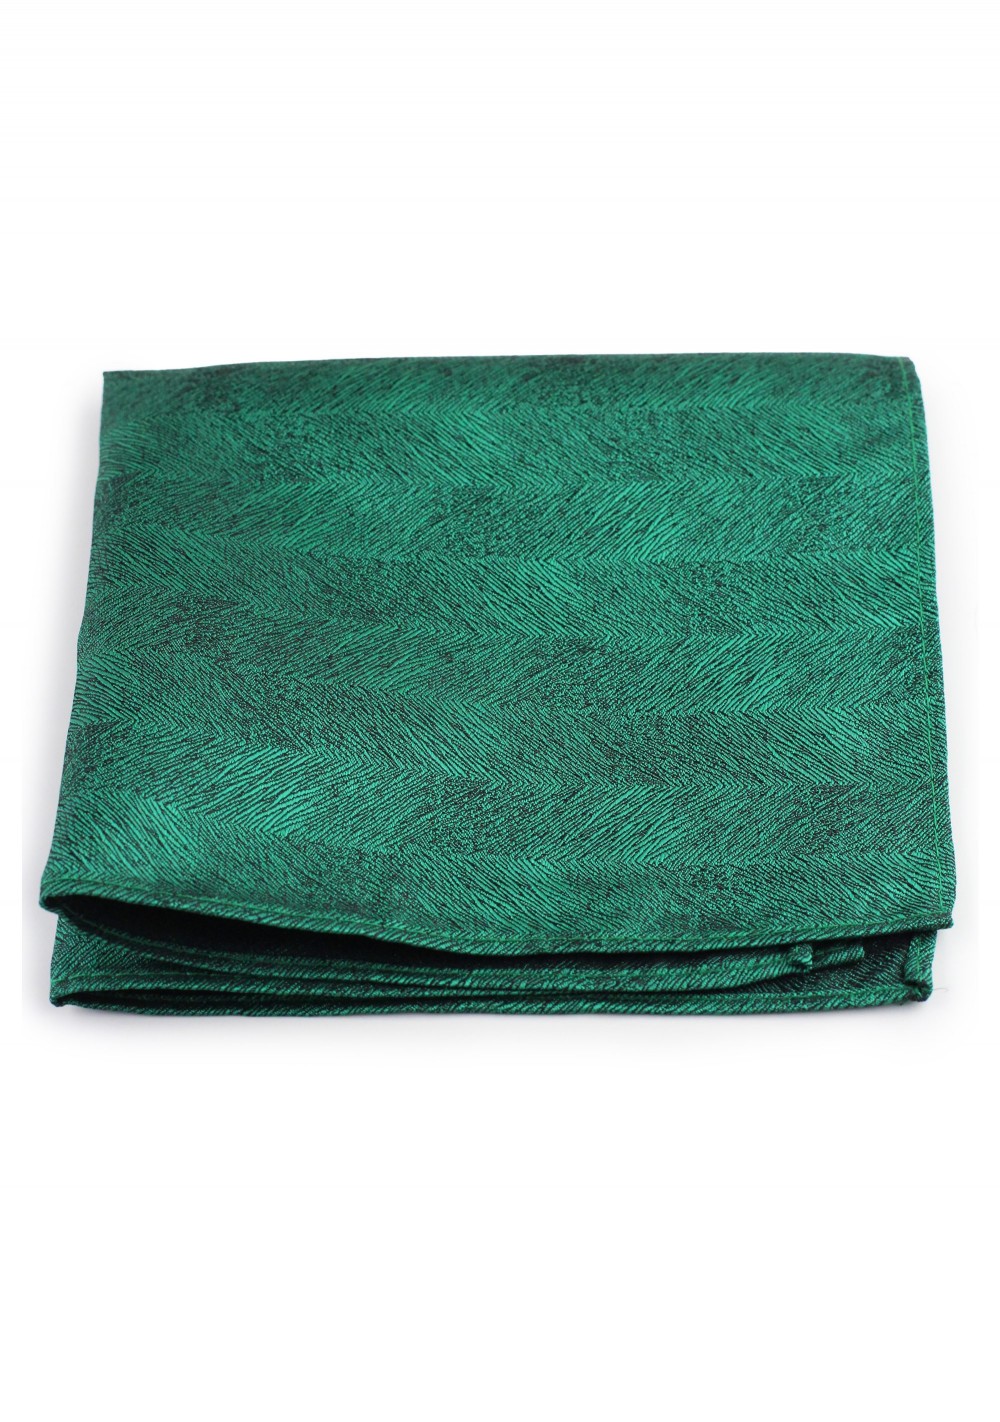 Woon Grain Textured Pocket Square in Green